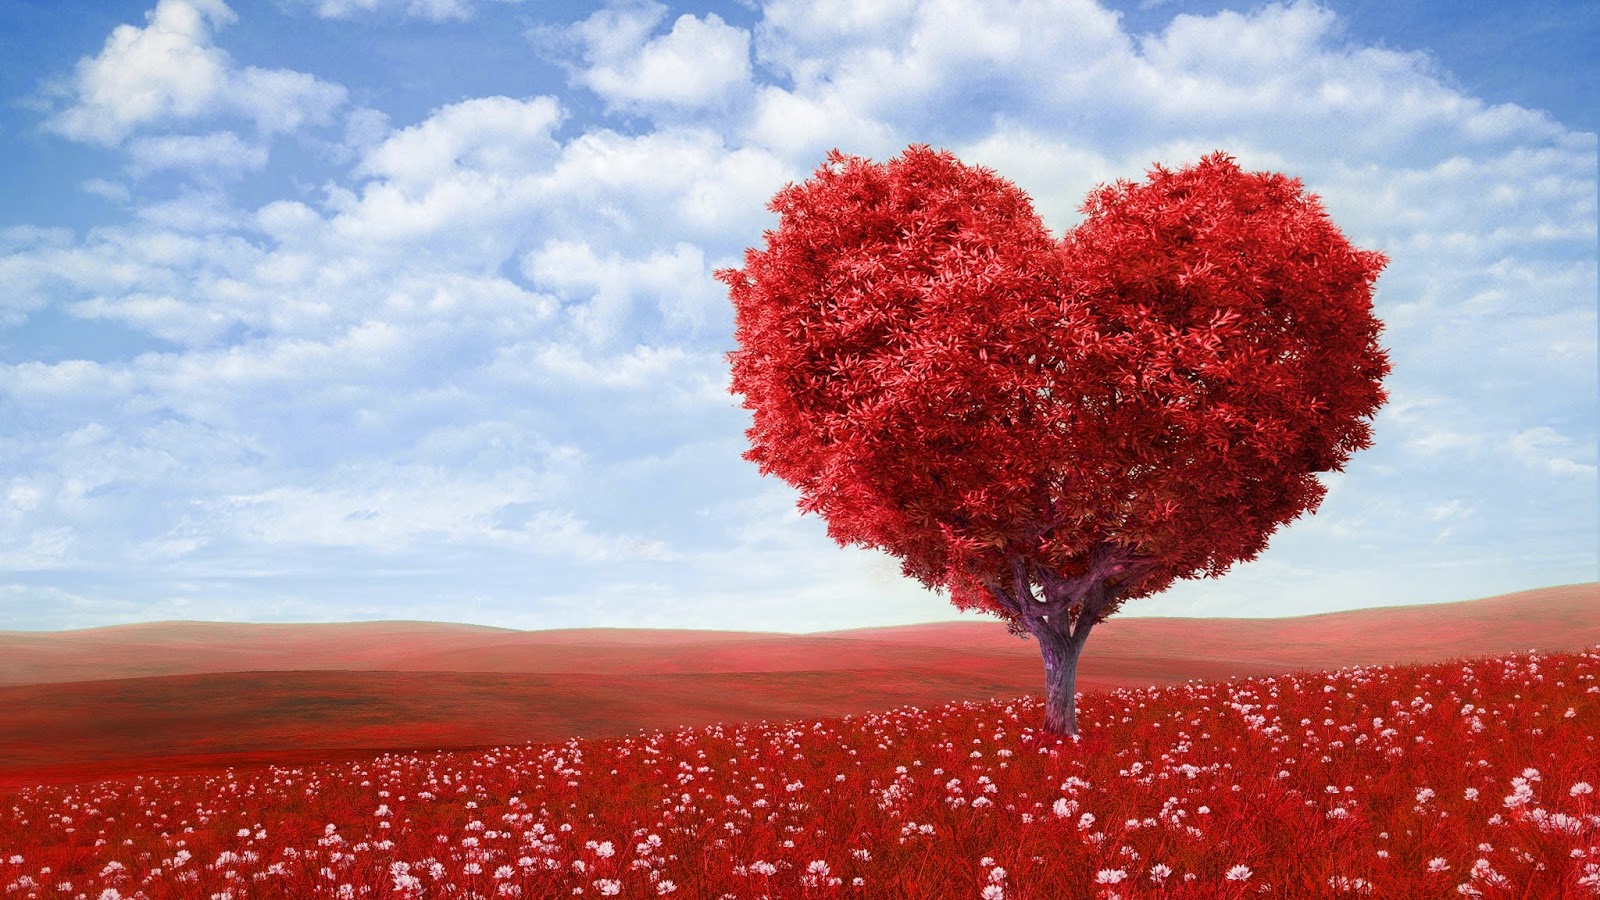 Hd Wallpapers Hdwallpapers Org In Love Heart Tree - Love Backgrounds For Photoshop , HD Wallpaper & Backgrounds